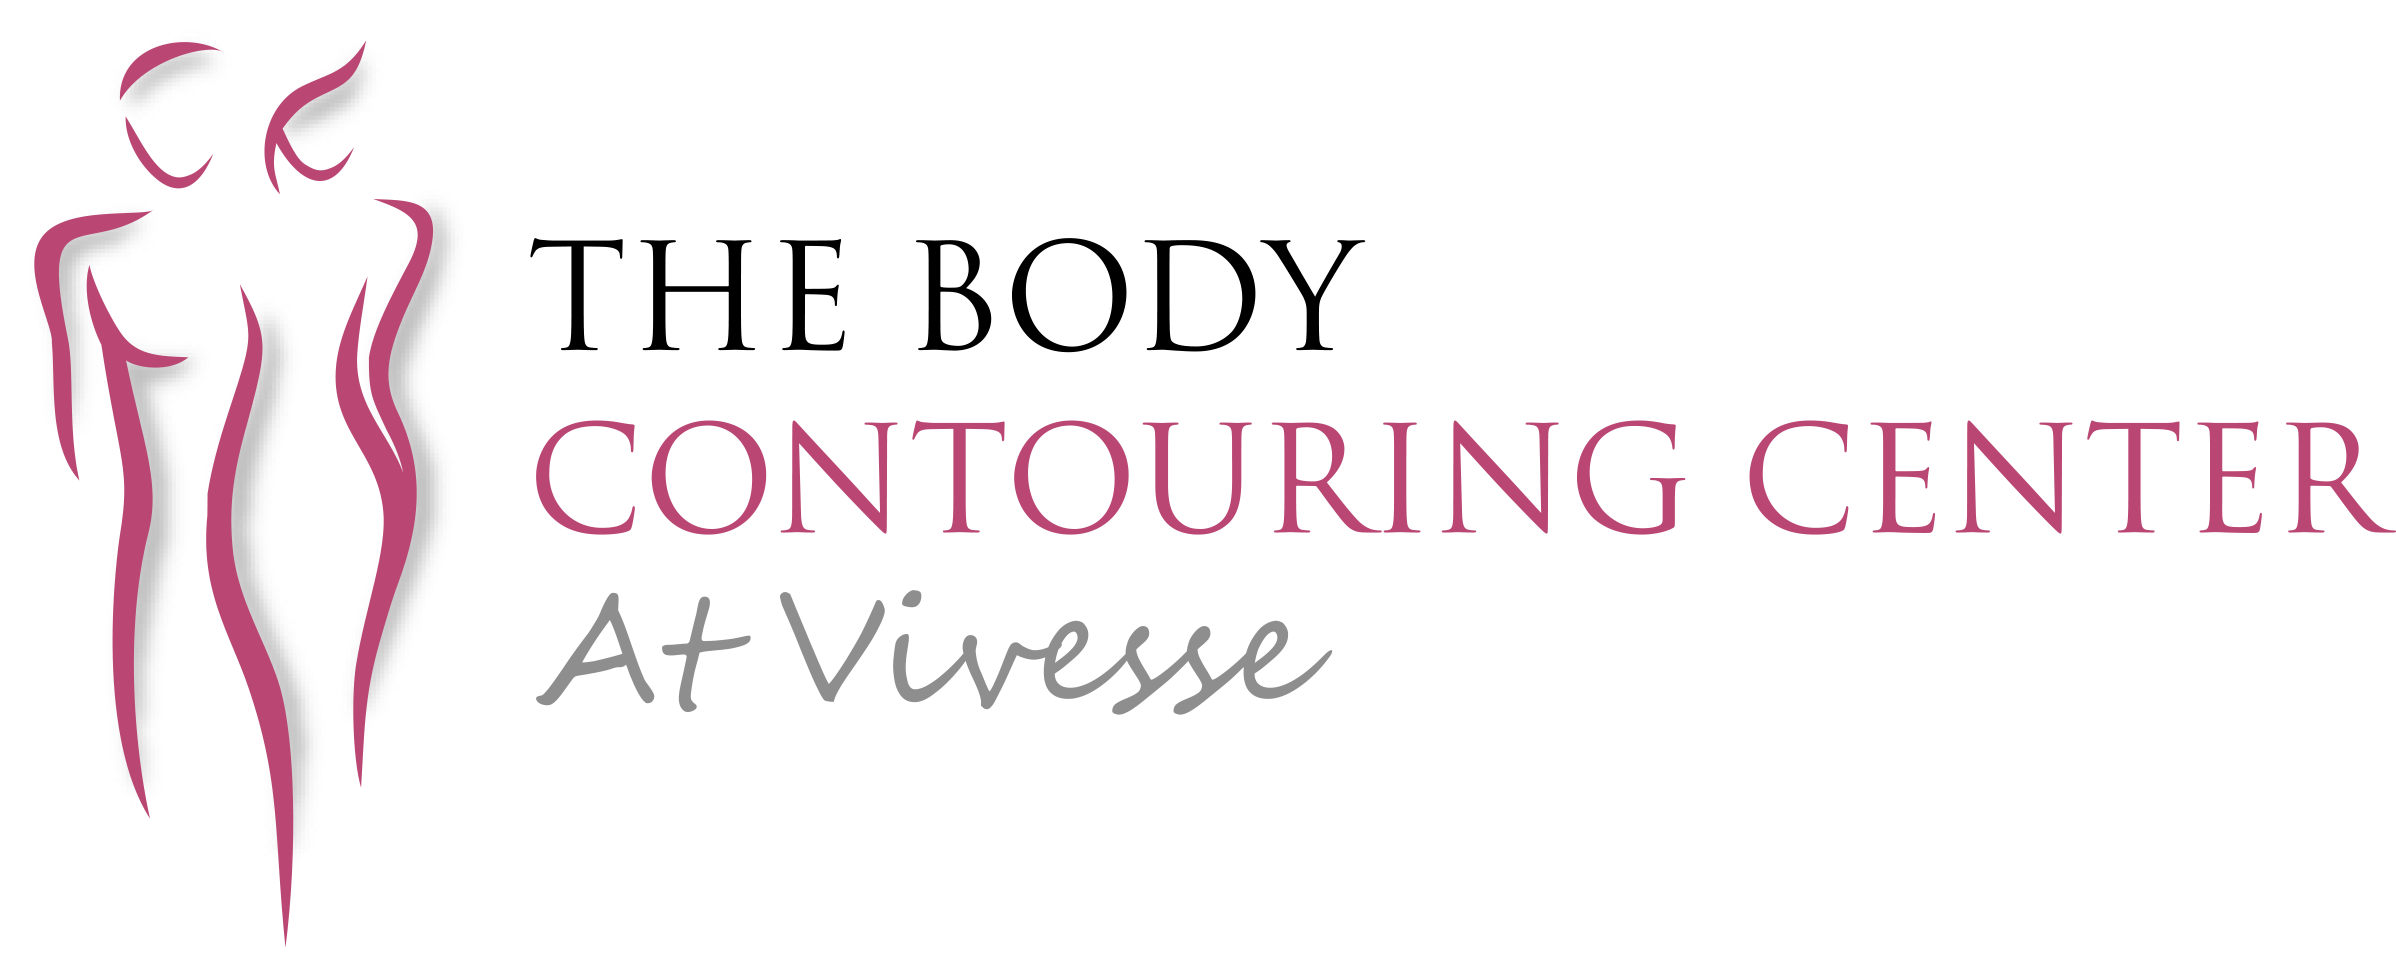 The Body Contouring Center at Vivesse